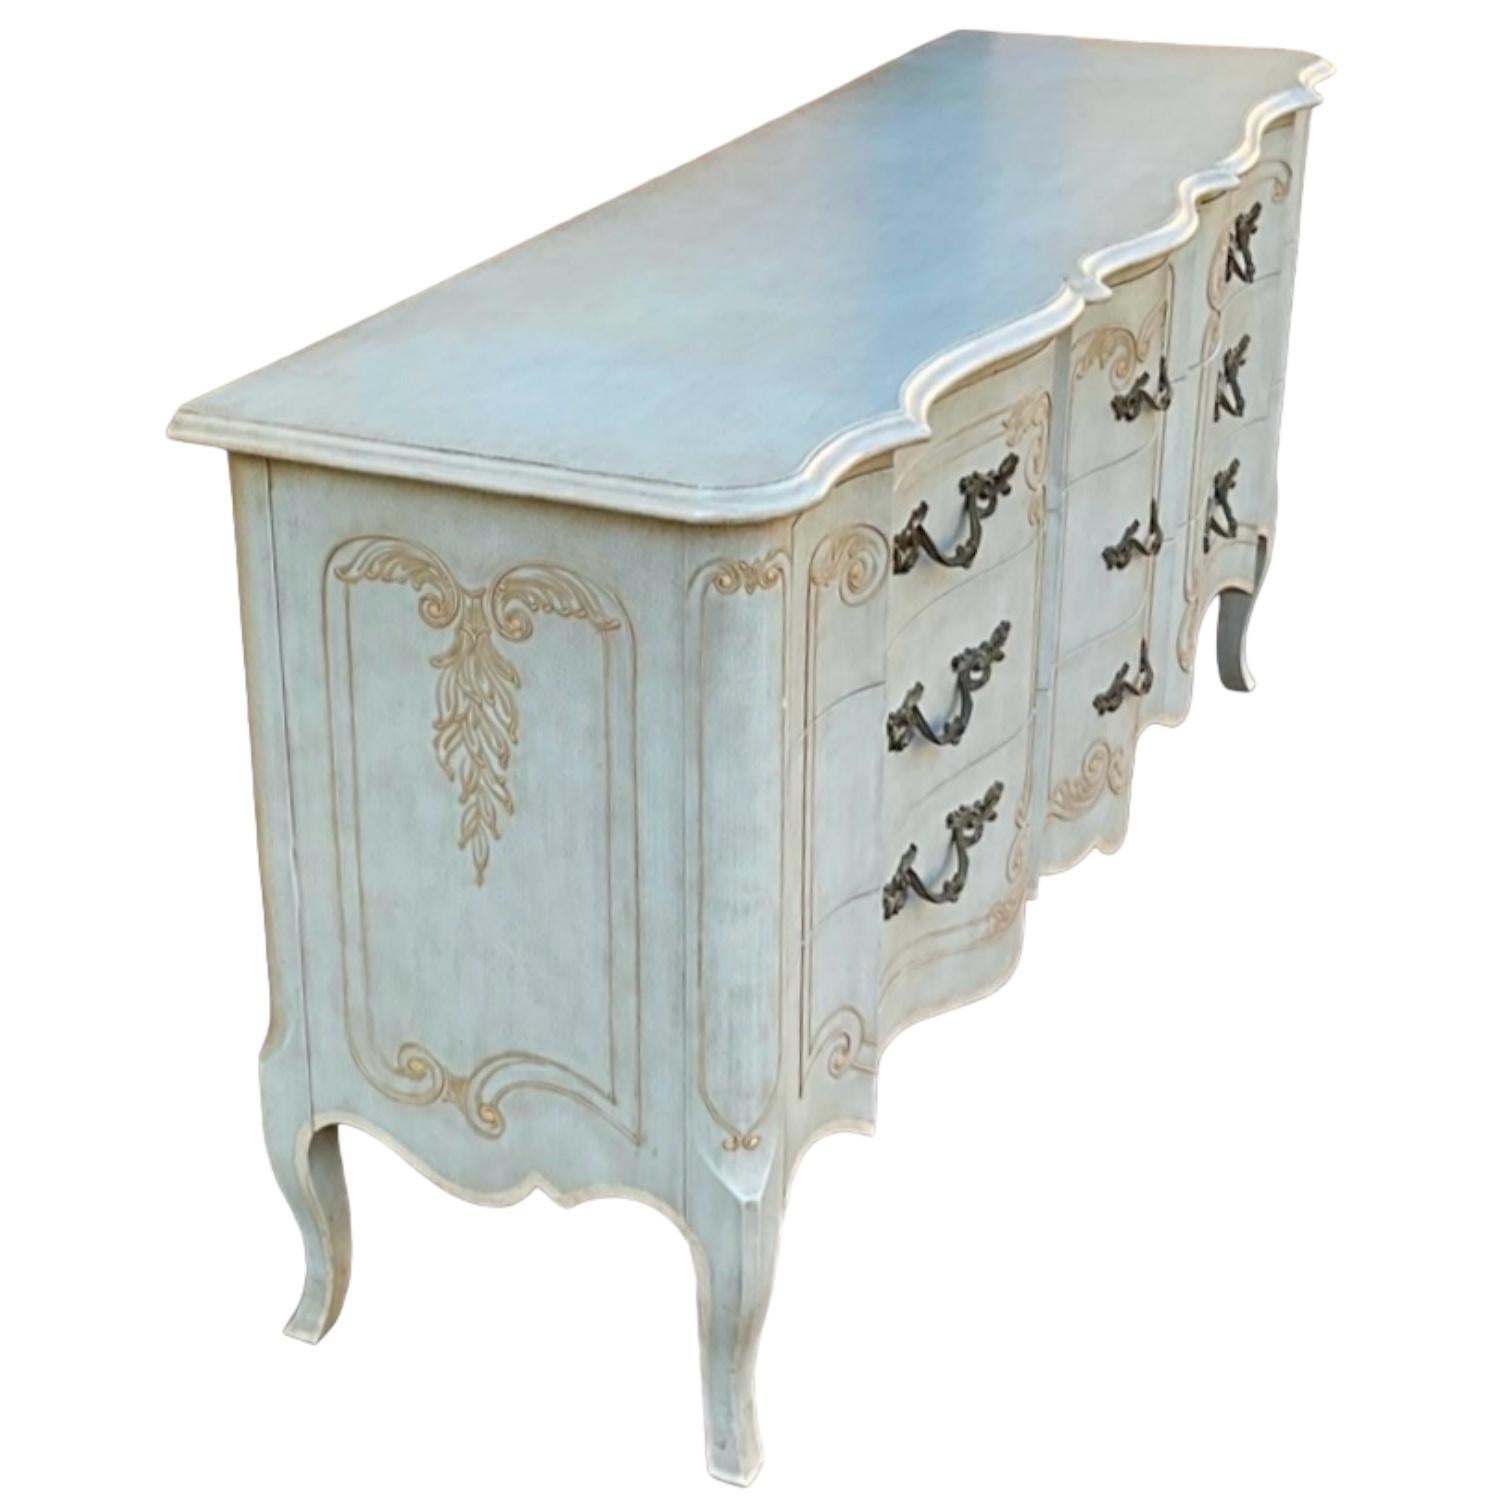 This is a French Provincial chest in an original French blue paint by John Widdicomb. It has the original brass hardware and dovetail construction. The nightstands are available as well.